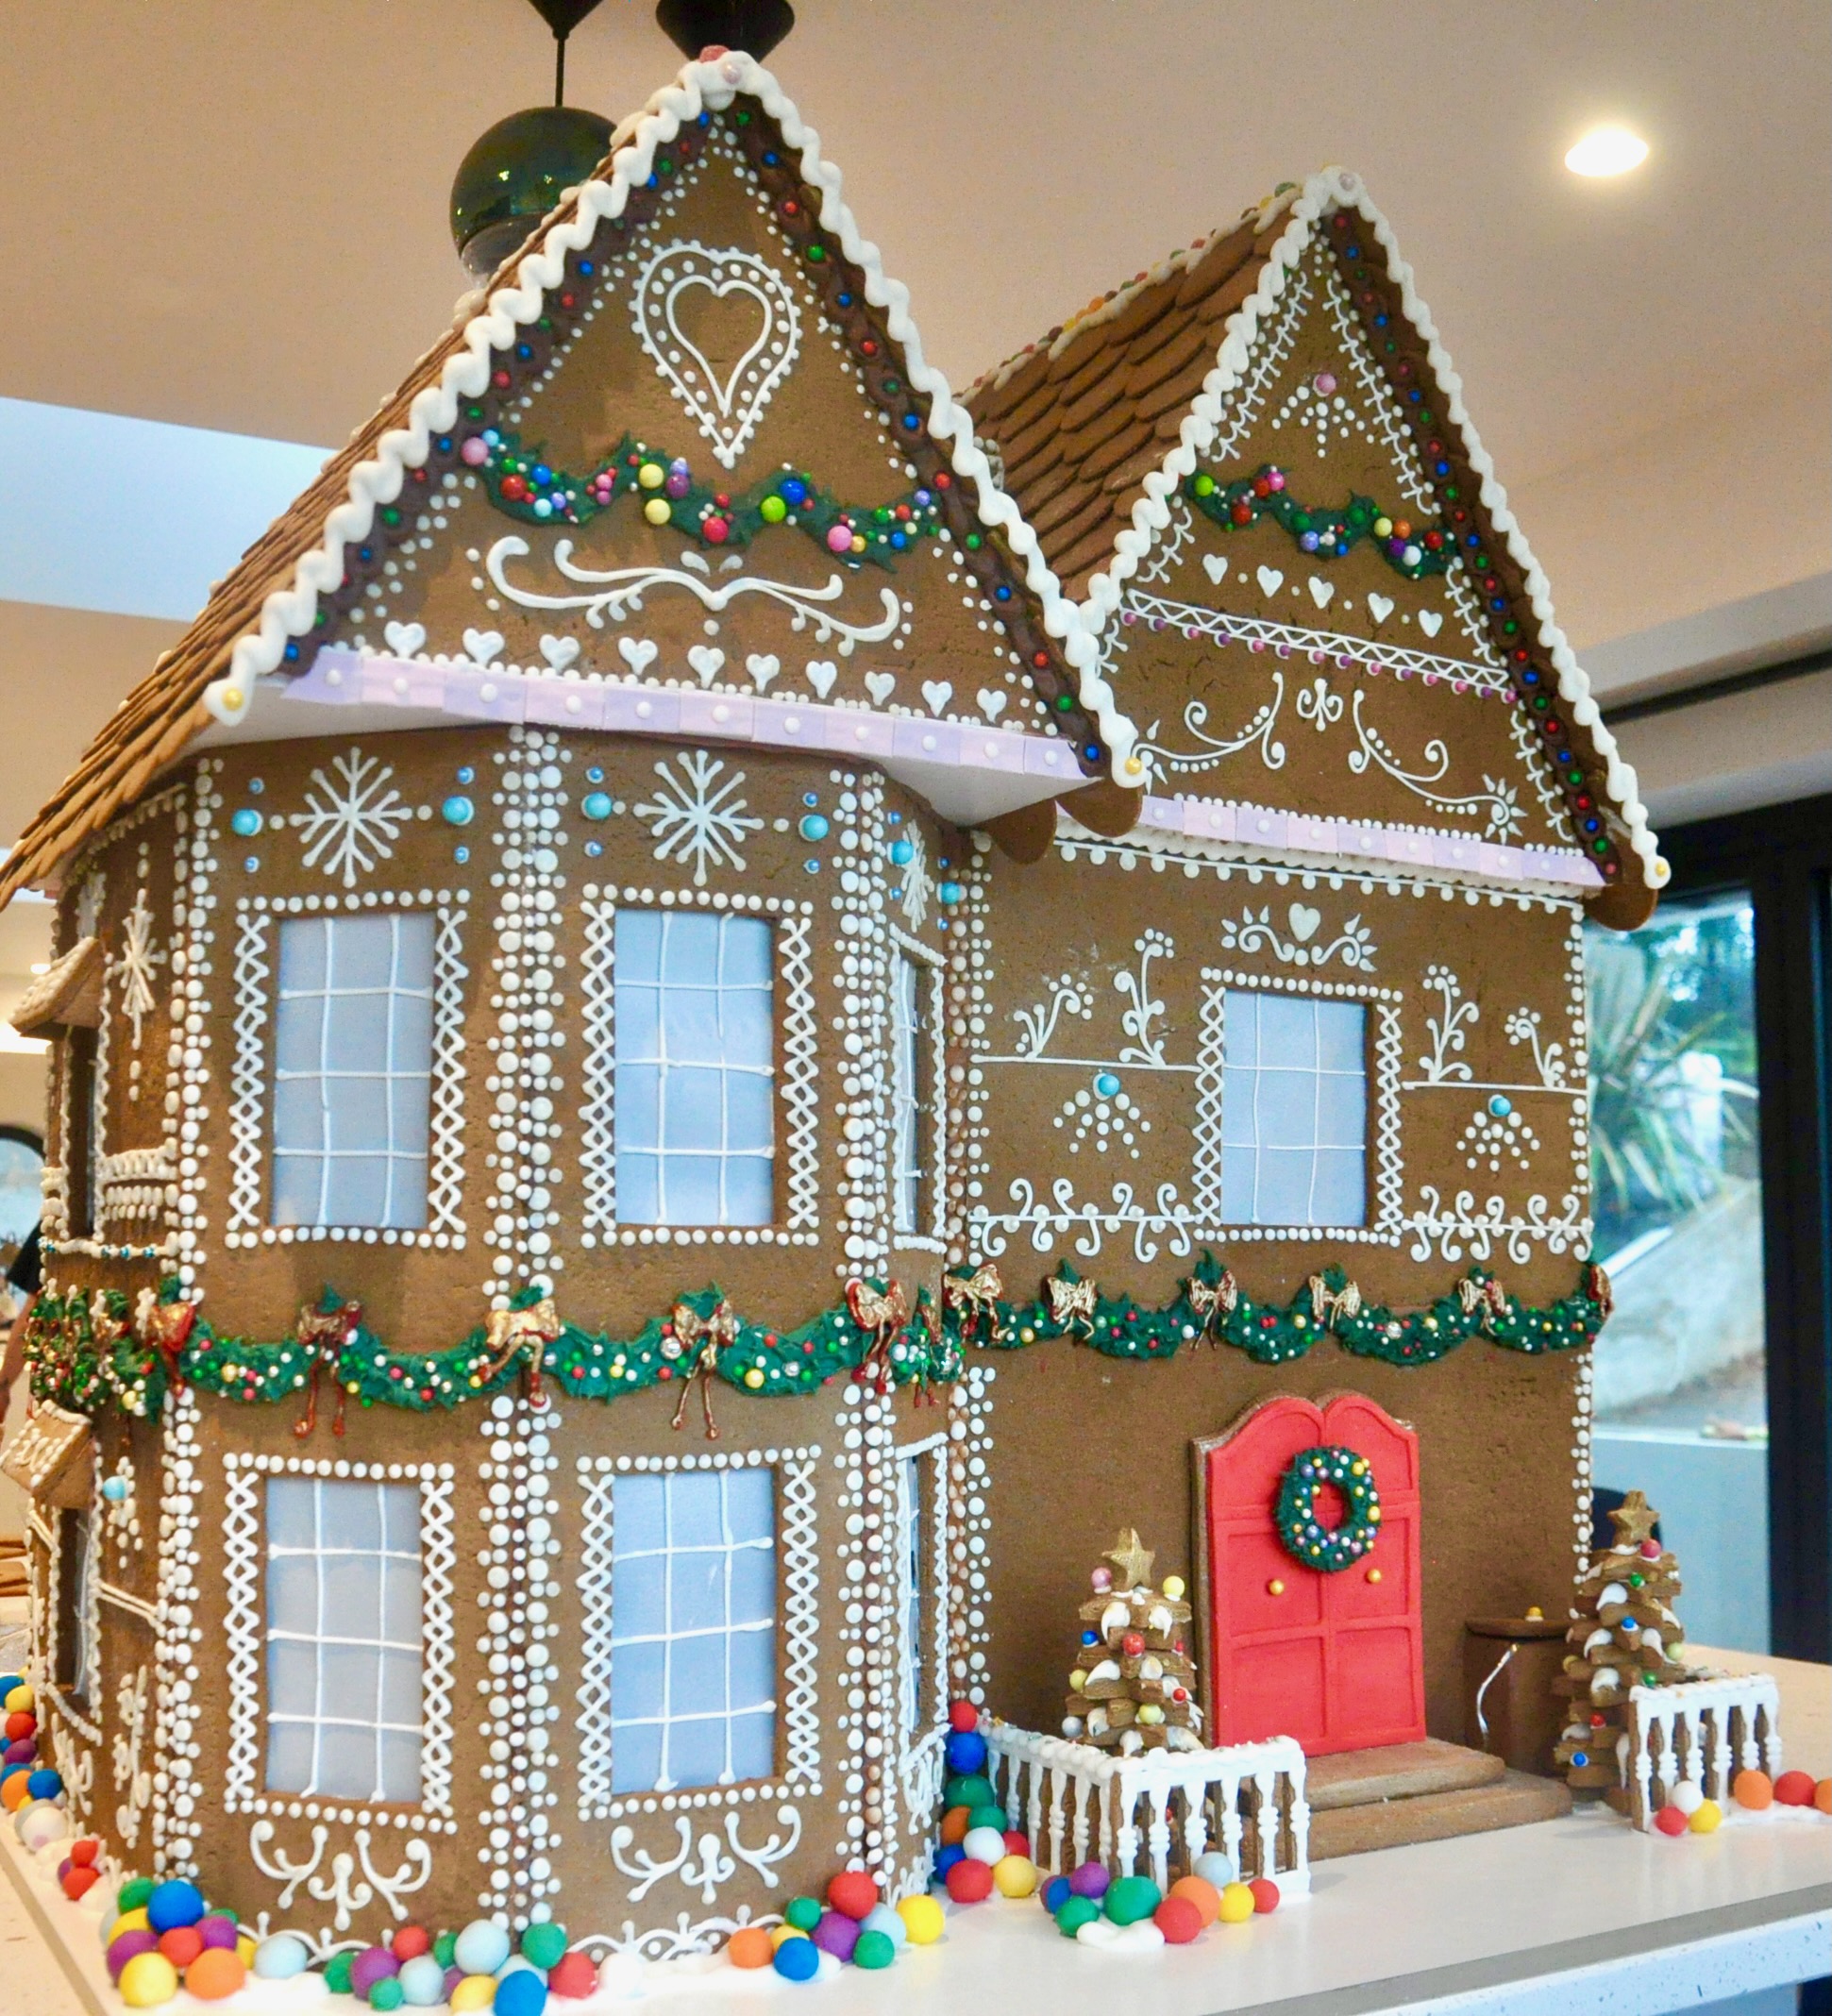 A huge 3ft tall gingerbread house with red front door and lots of intricate piping over the front